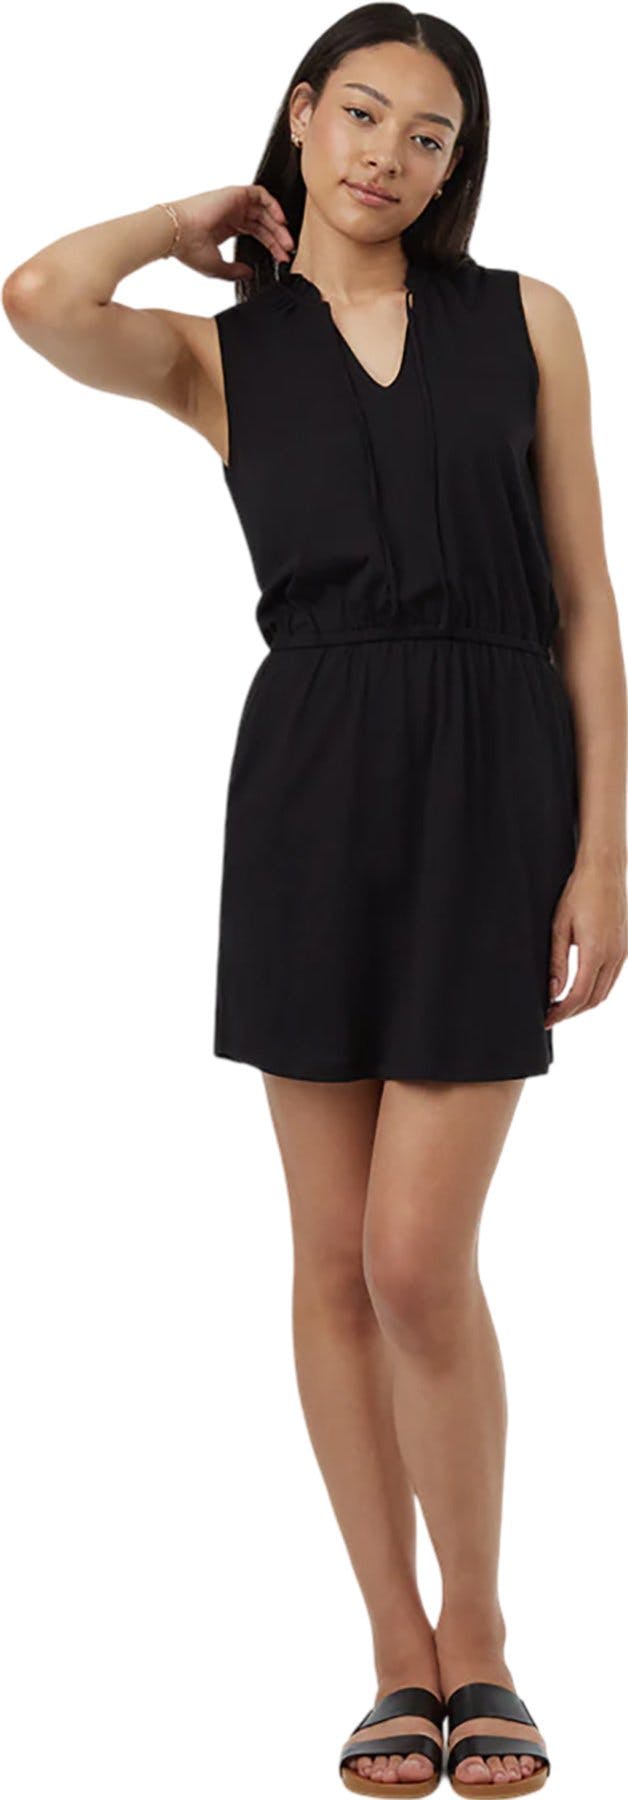 Product image for Arden TreeBlend Dress - Women's